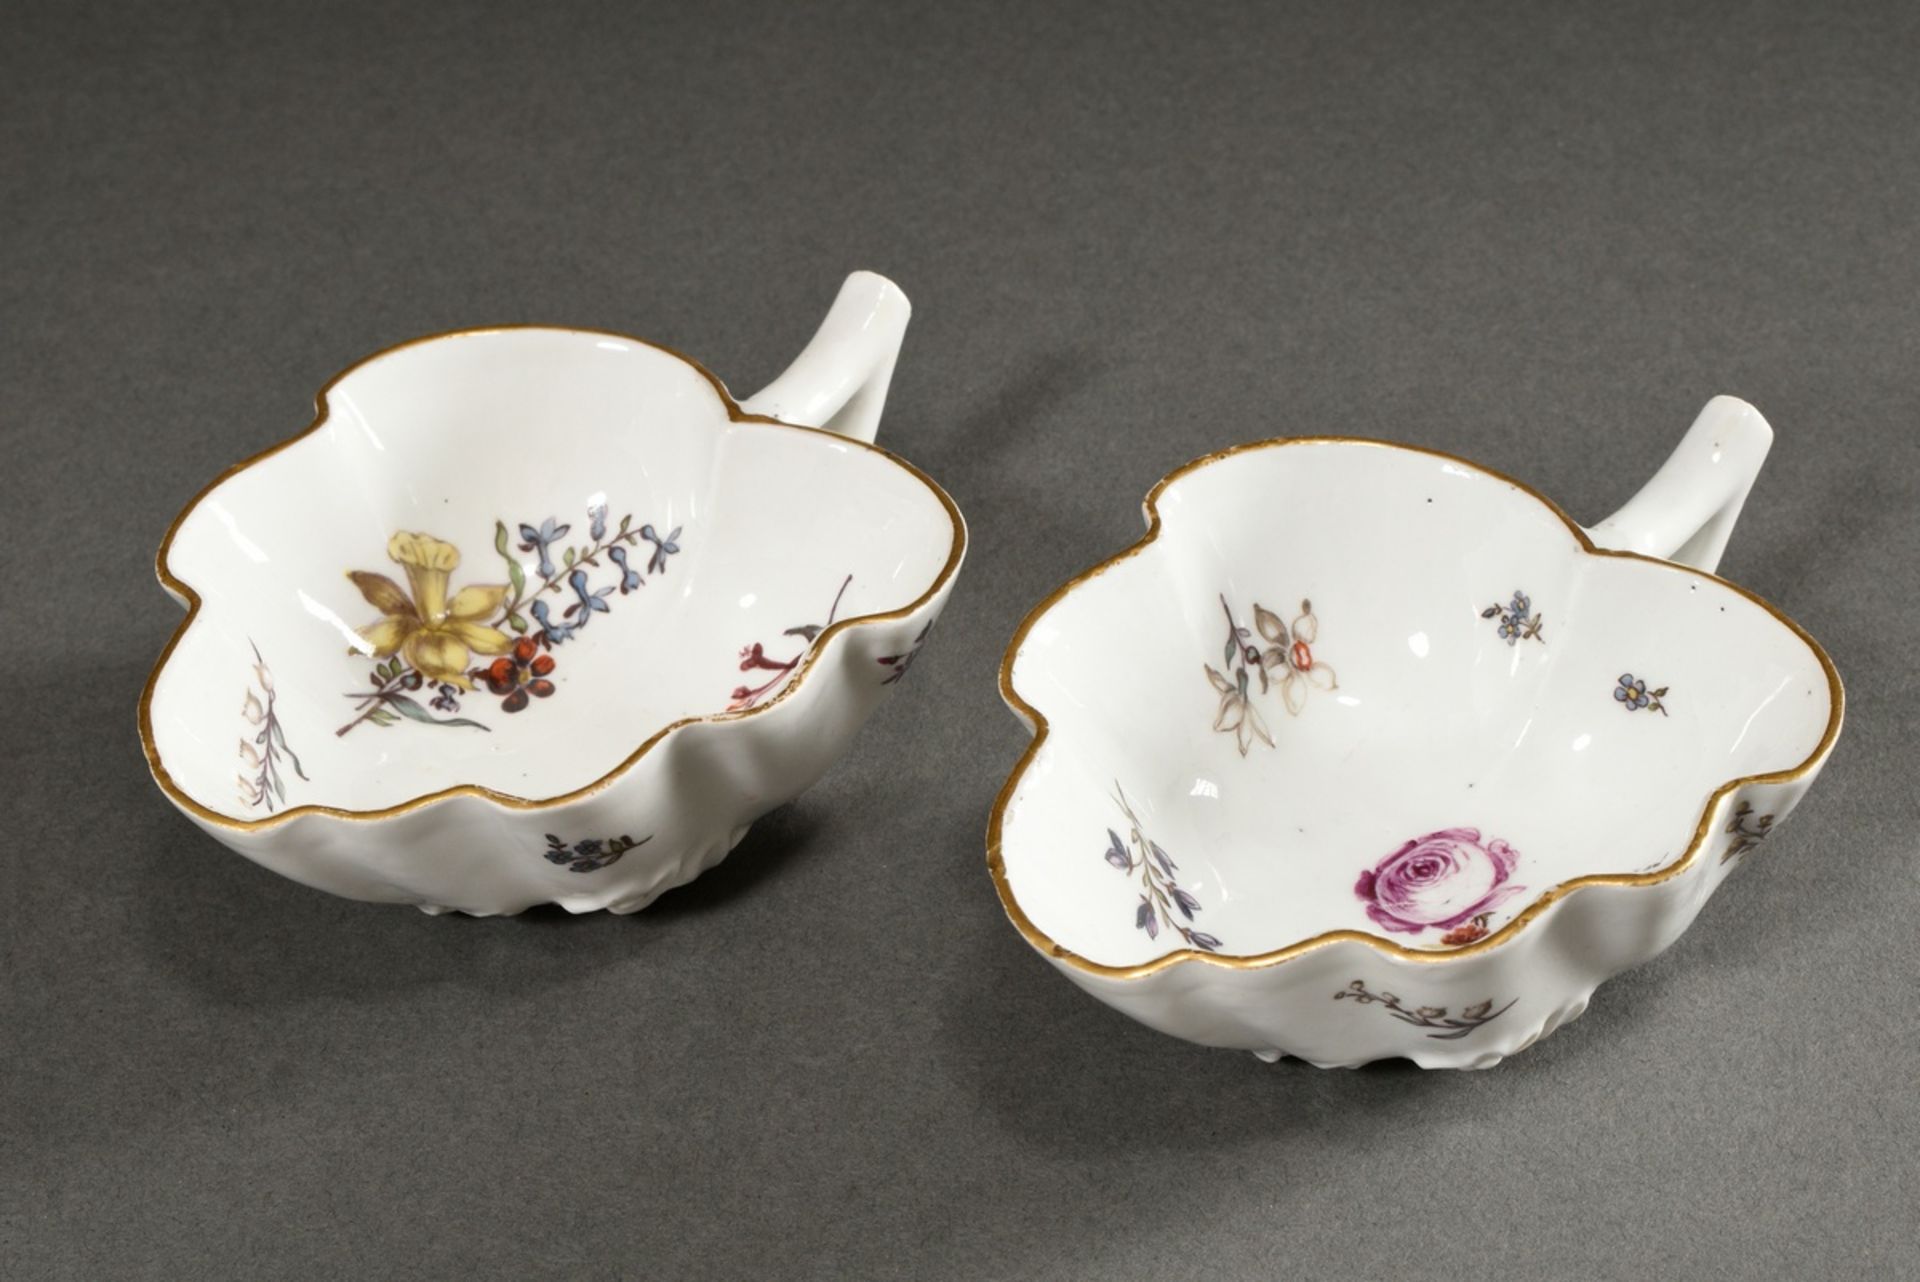 4 Pieces Meissen with polychrome "woodcut flowers" painting, 18th c.: 2 leaf bowls (12x9cm, 1x rest - Image 6 of 7